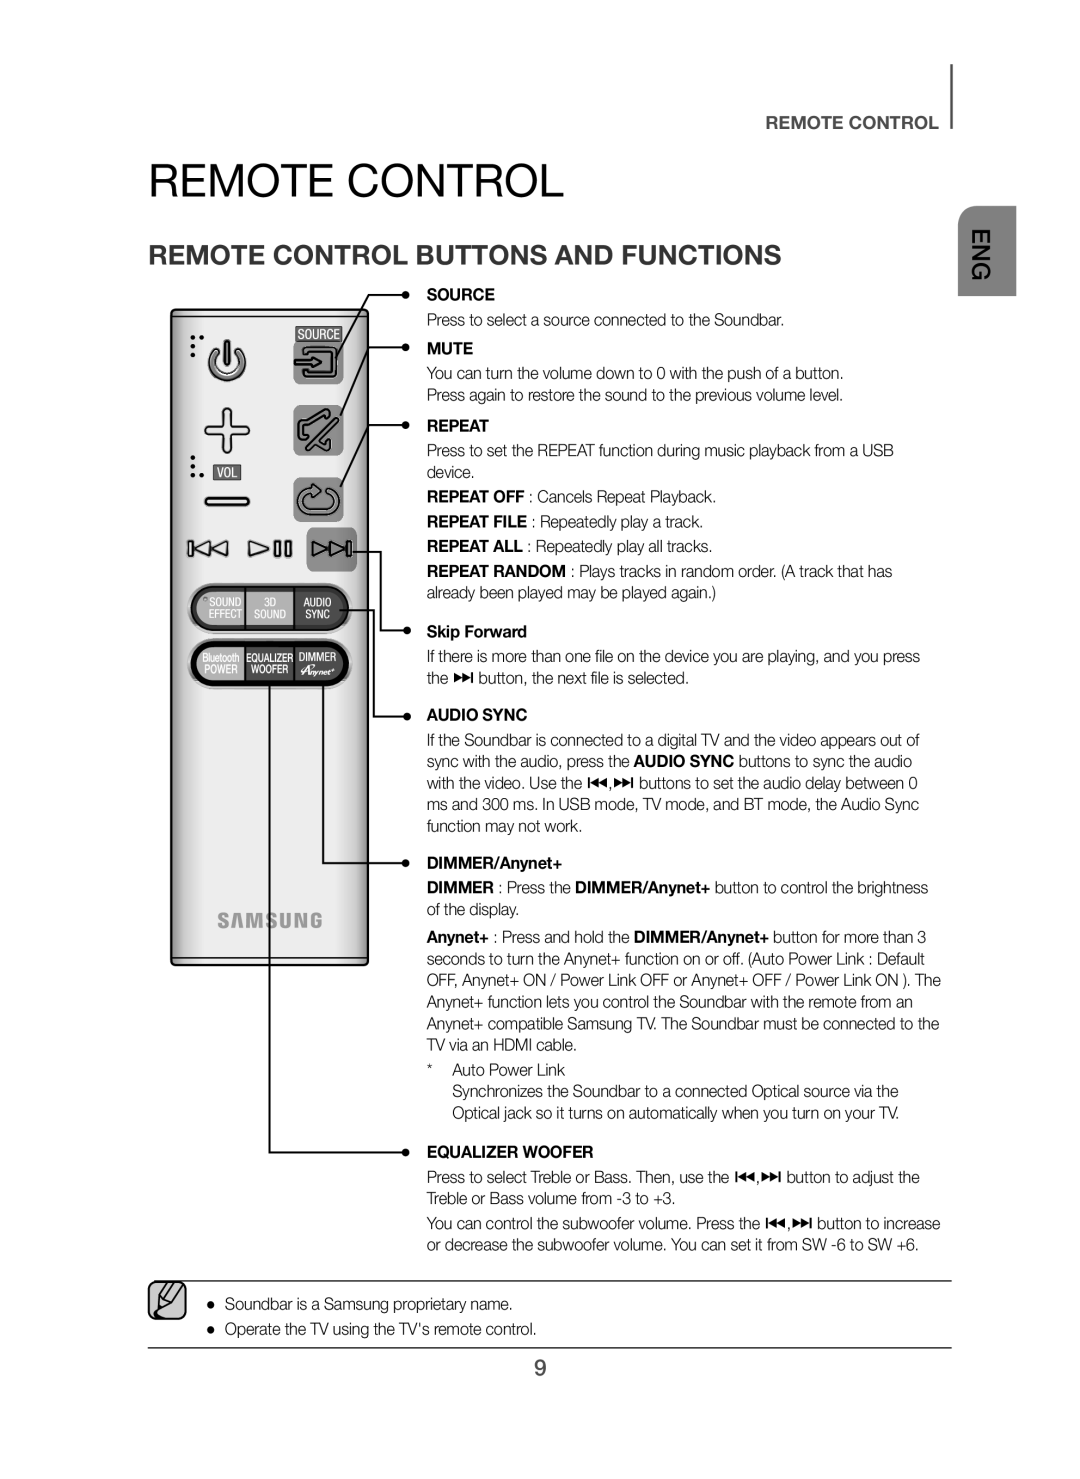 Samsung HW-H450/XE, HW-H450/TK, HW-H450/EN manual Remote Control Buttons and Functions, Skip Forward, DIMMER/Anynet+ 